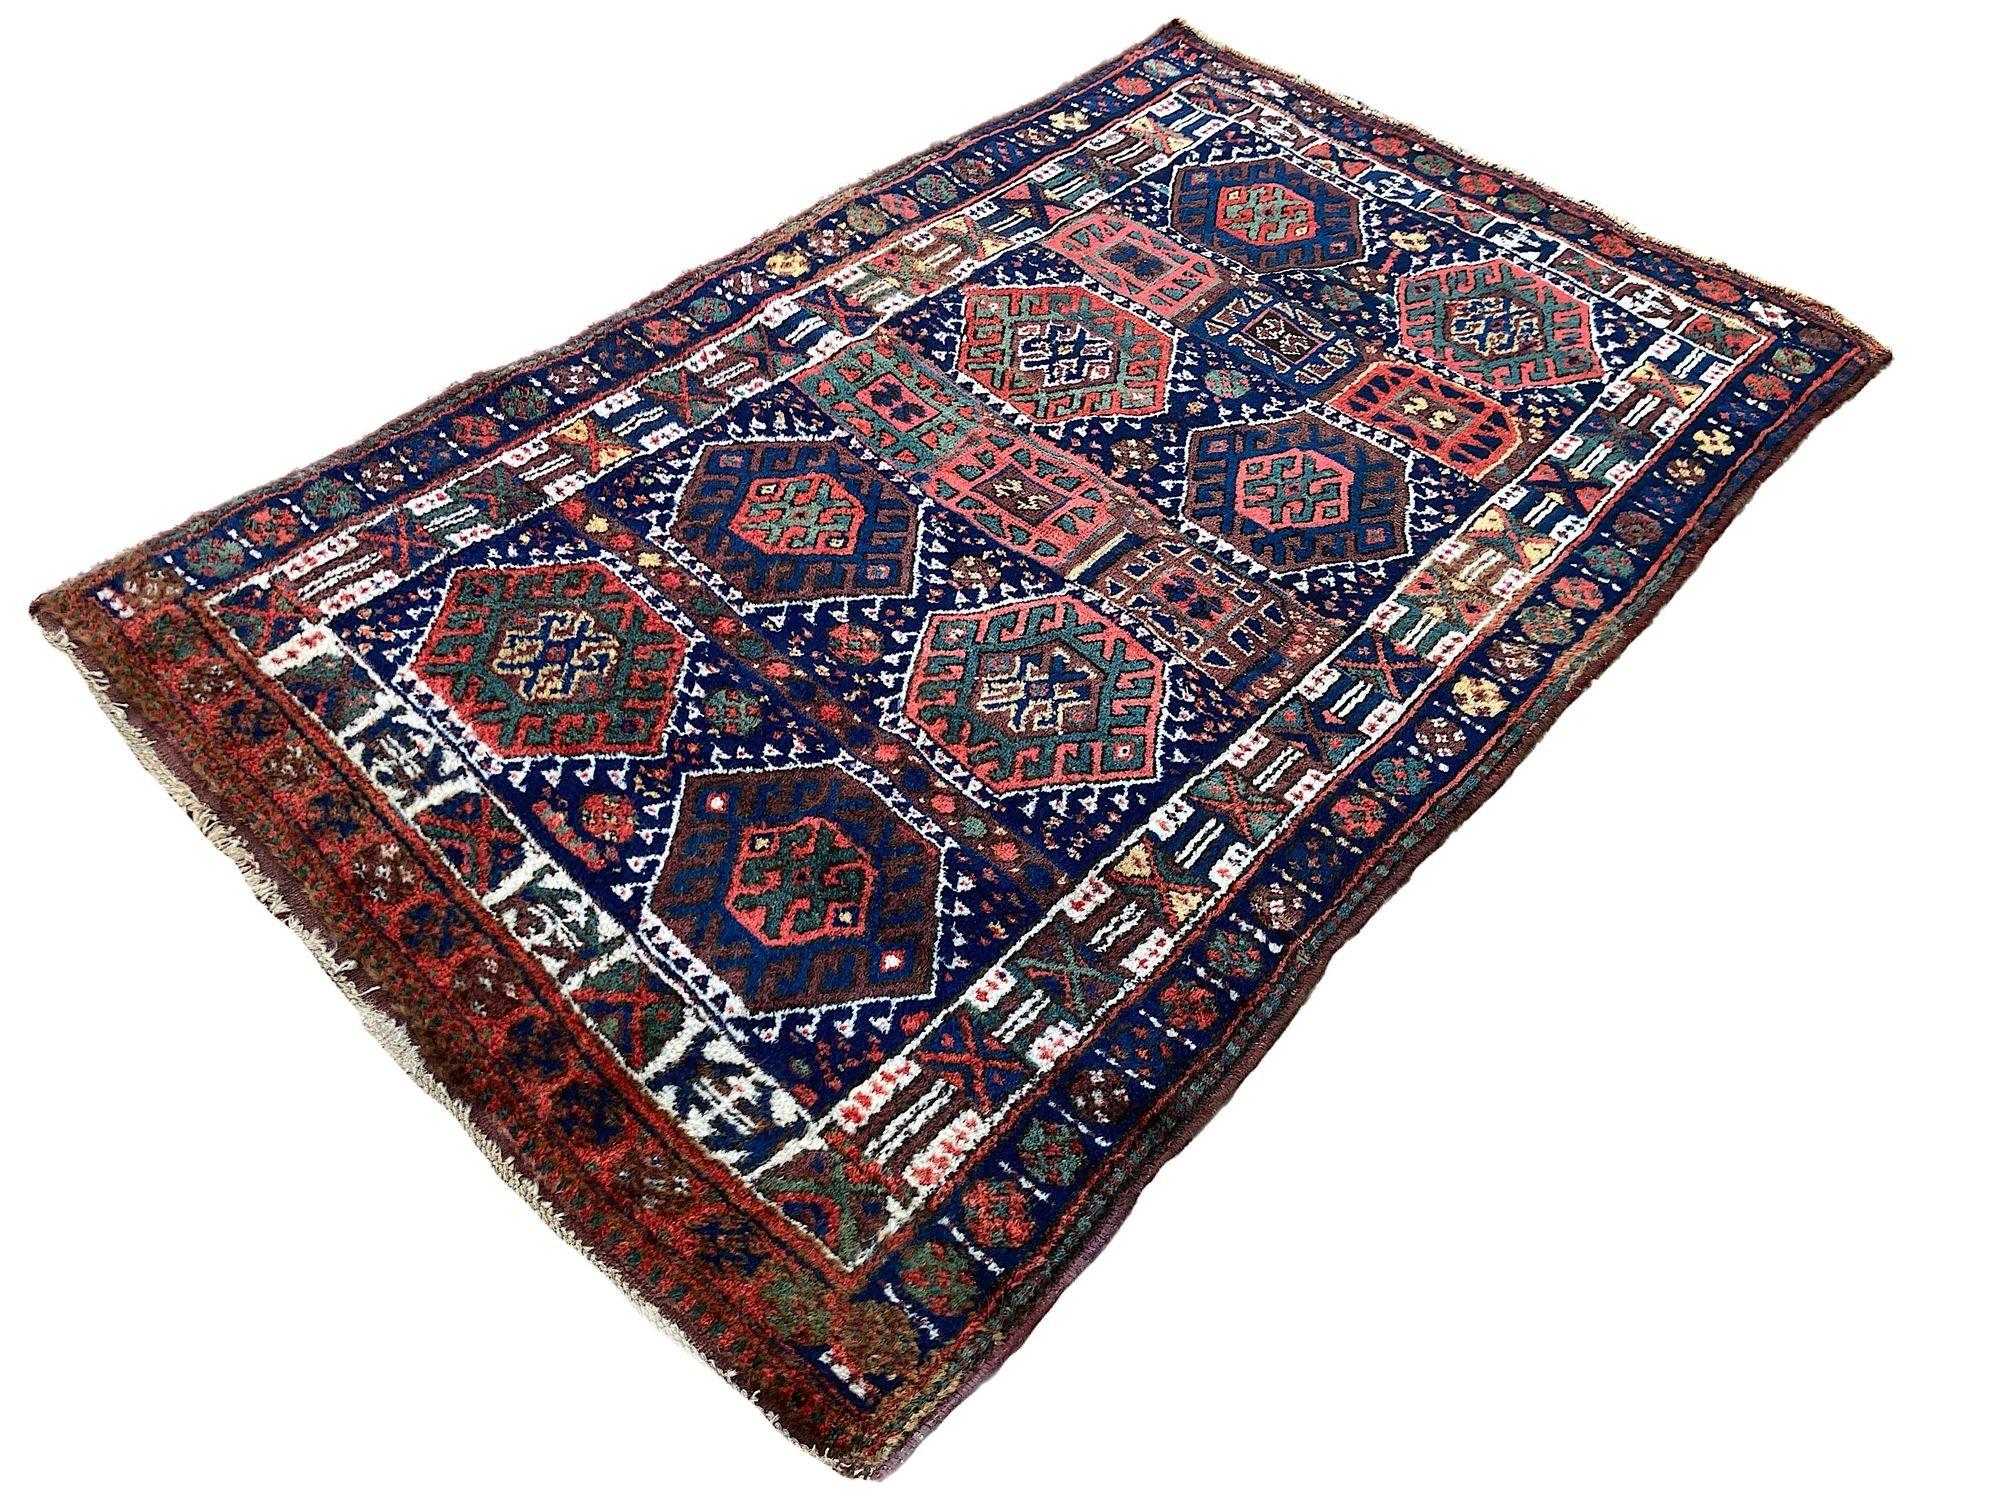 Antique Kurdish Rug 1.92m x 1.19m In Good Condition For Sale In St. Albans, GB